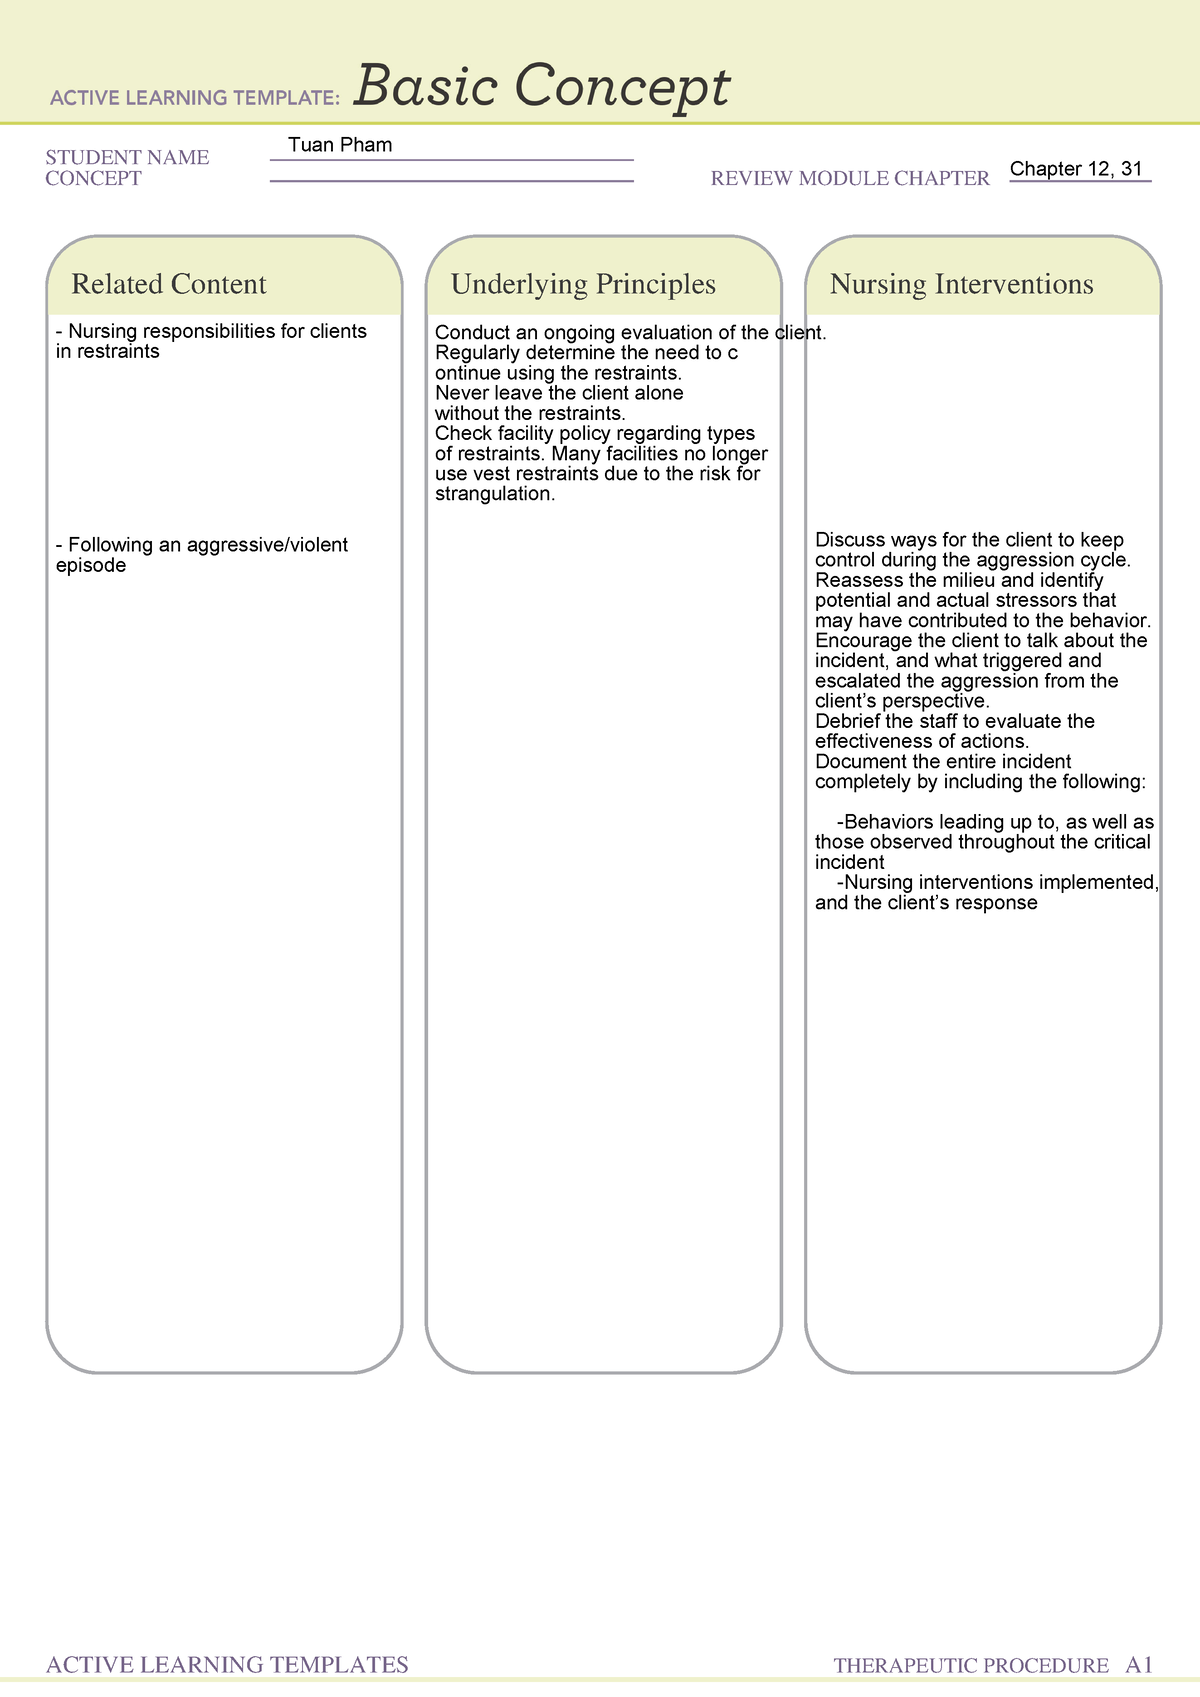 Ati Remediation Template Basic Concept Example